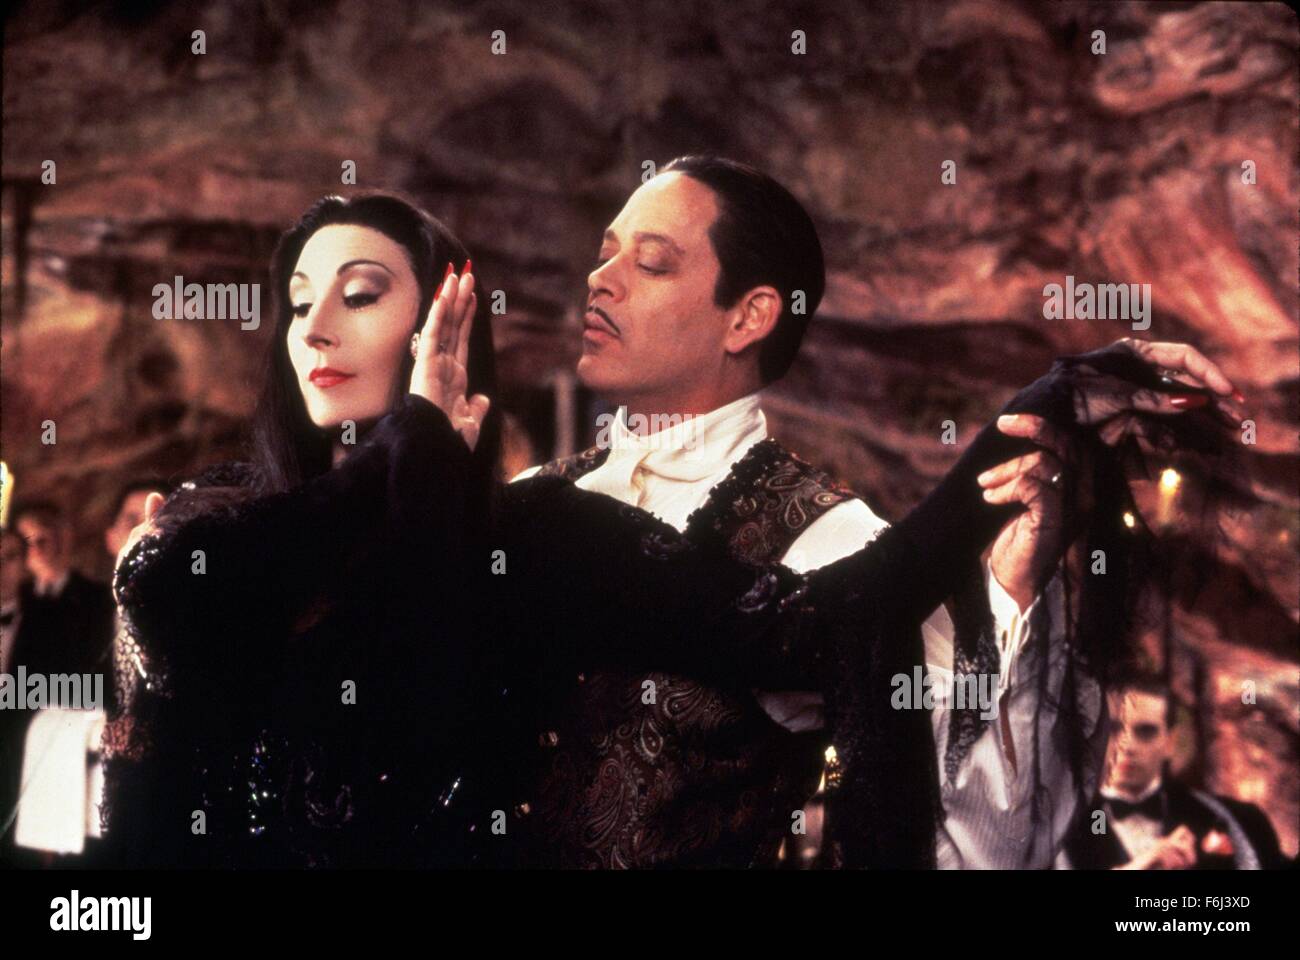 1993, Film Title: ADDAMS FAMILY VALUES, Director: BARRY SONNENFELD, Studio: PARAMOUNT, Pictured: ANJELICA HUSTON, RAUL JULIA. (Credit Image: SNAP) Stock Photo